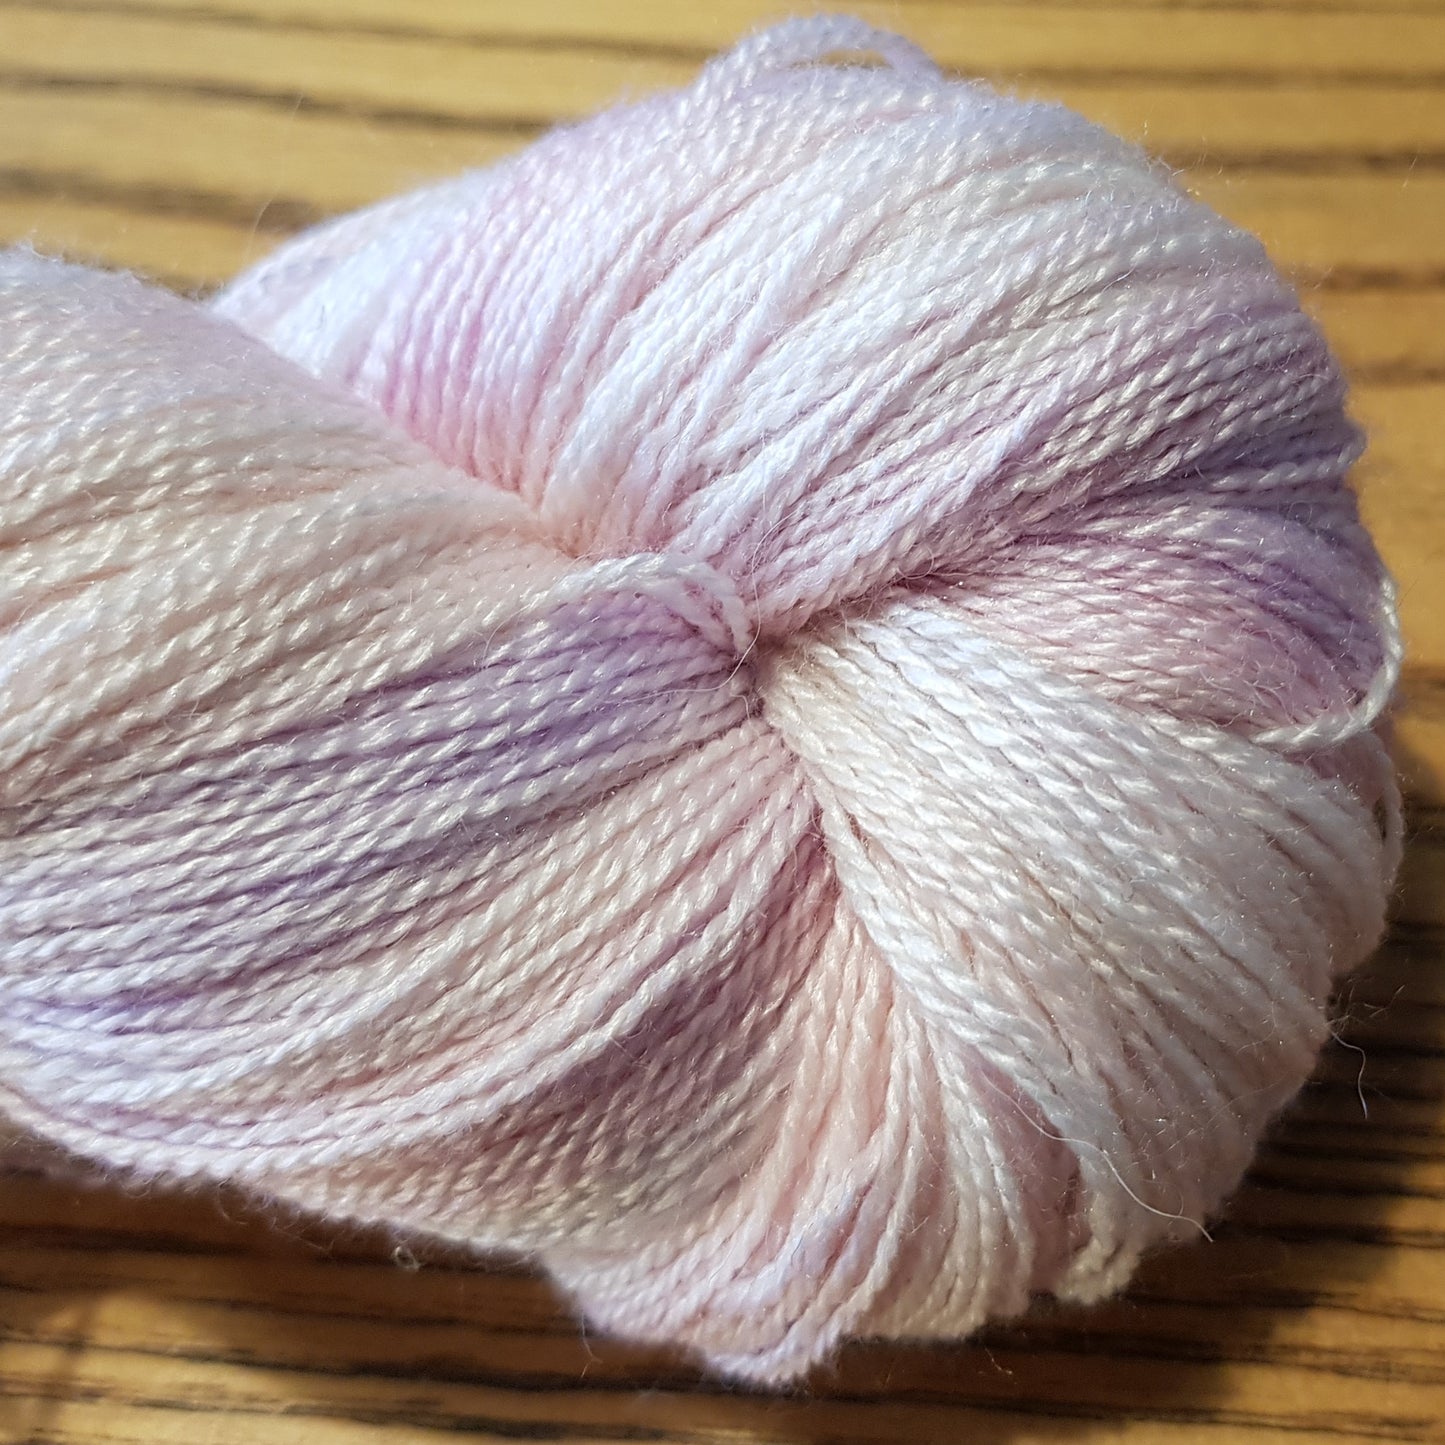 100G Bluefaced Leicester and silk hand dyed Lace Weight Yarn- "Pink and Lilac blush" - *SALE*